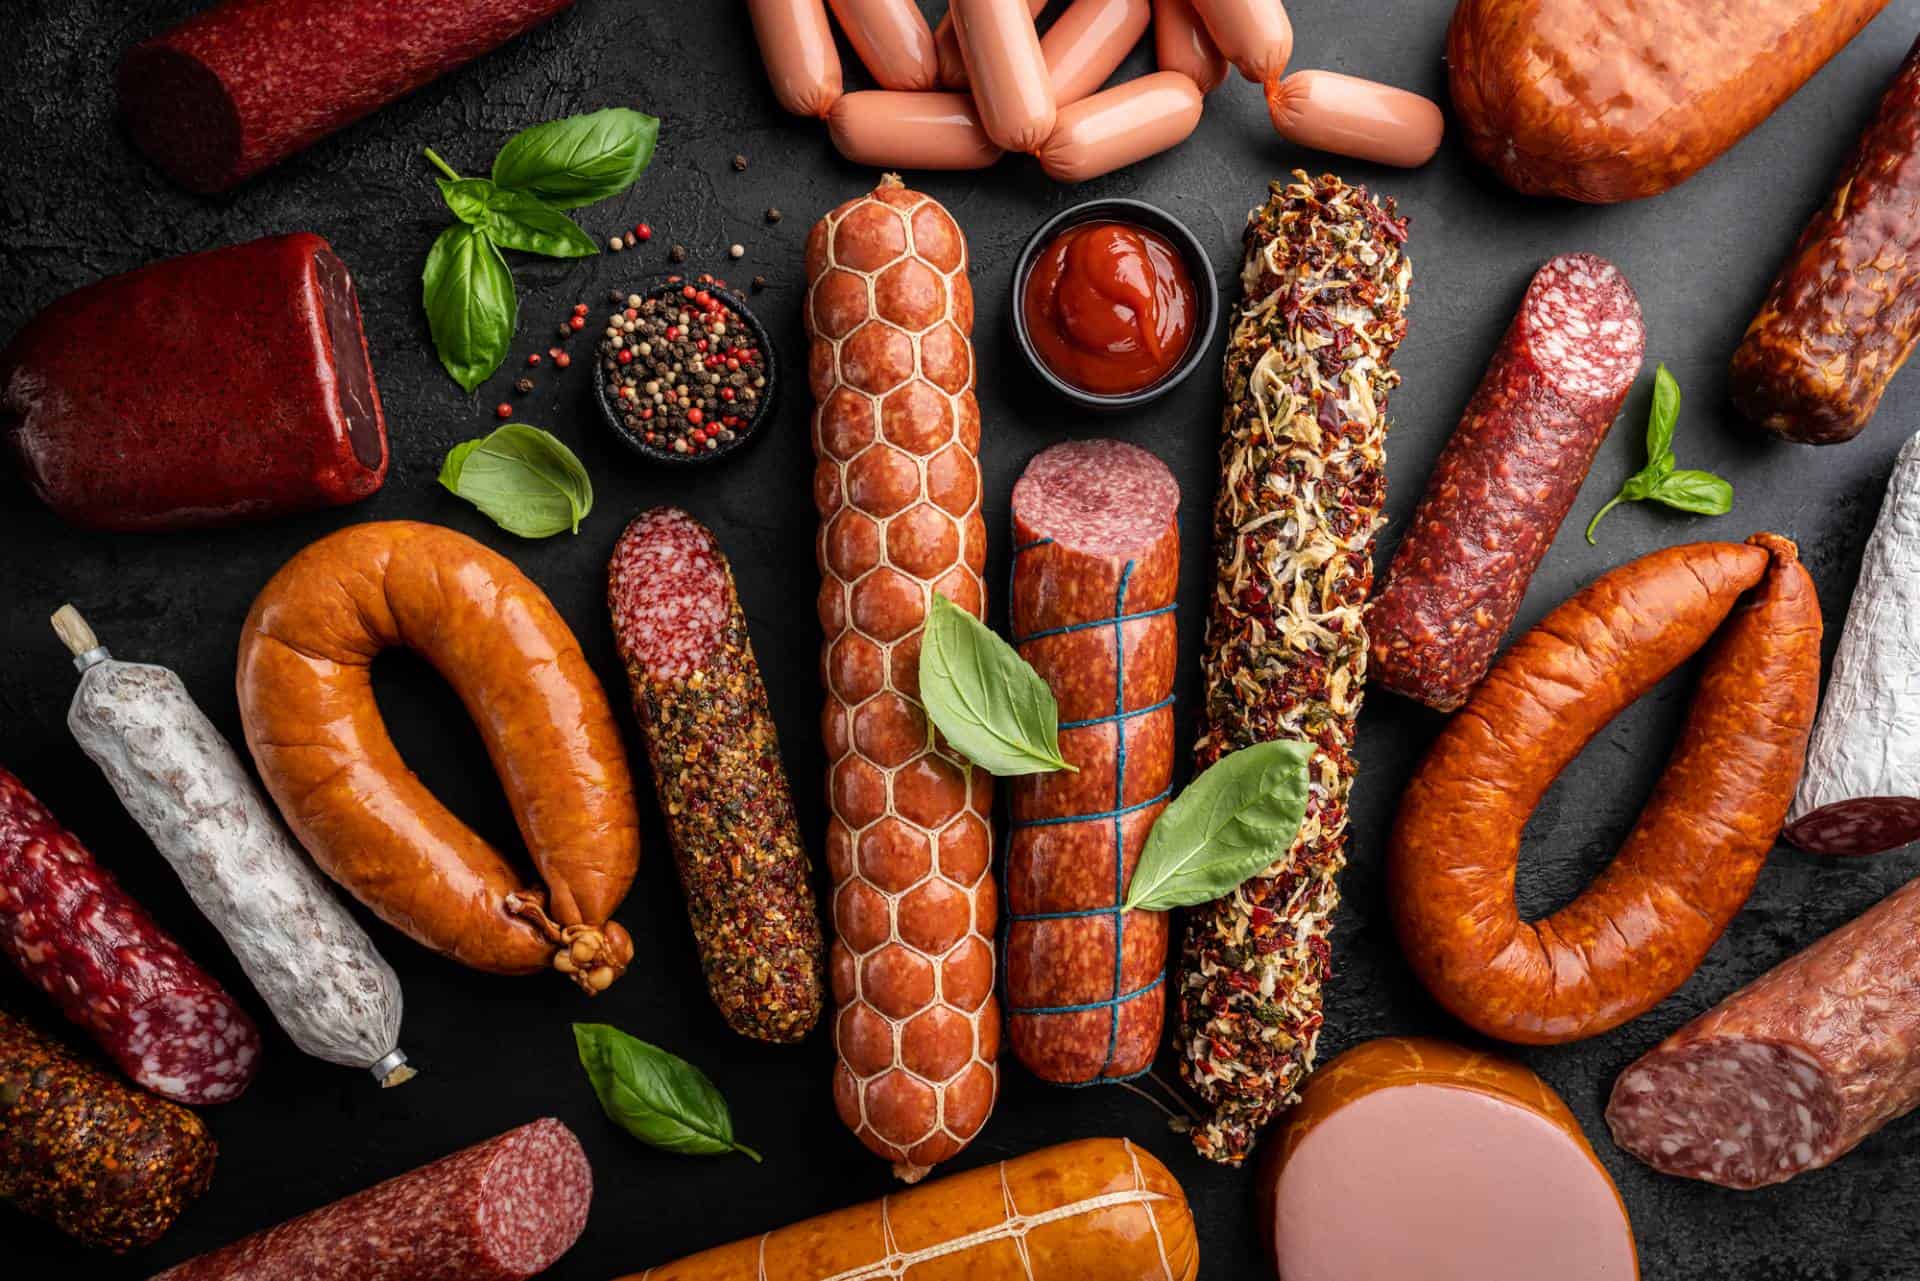 How many types of sausage are there?